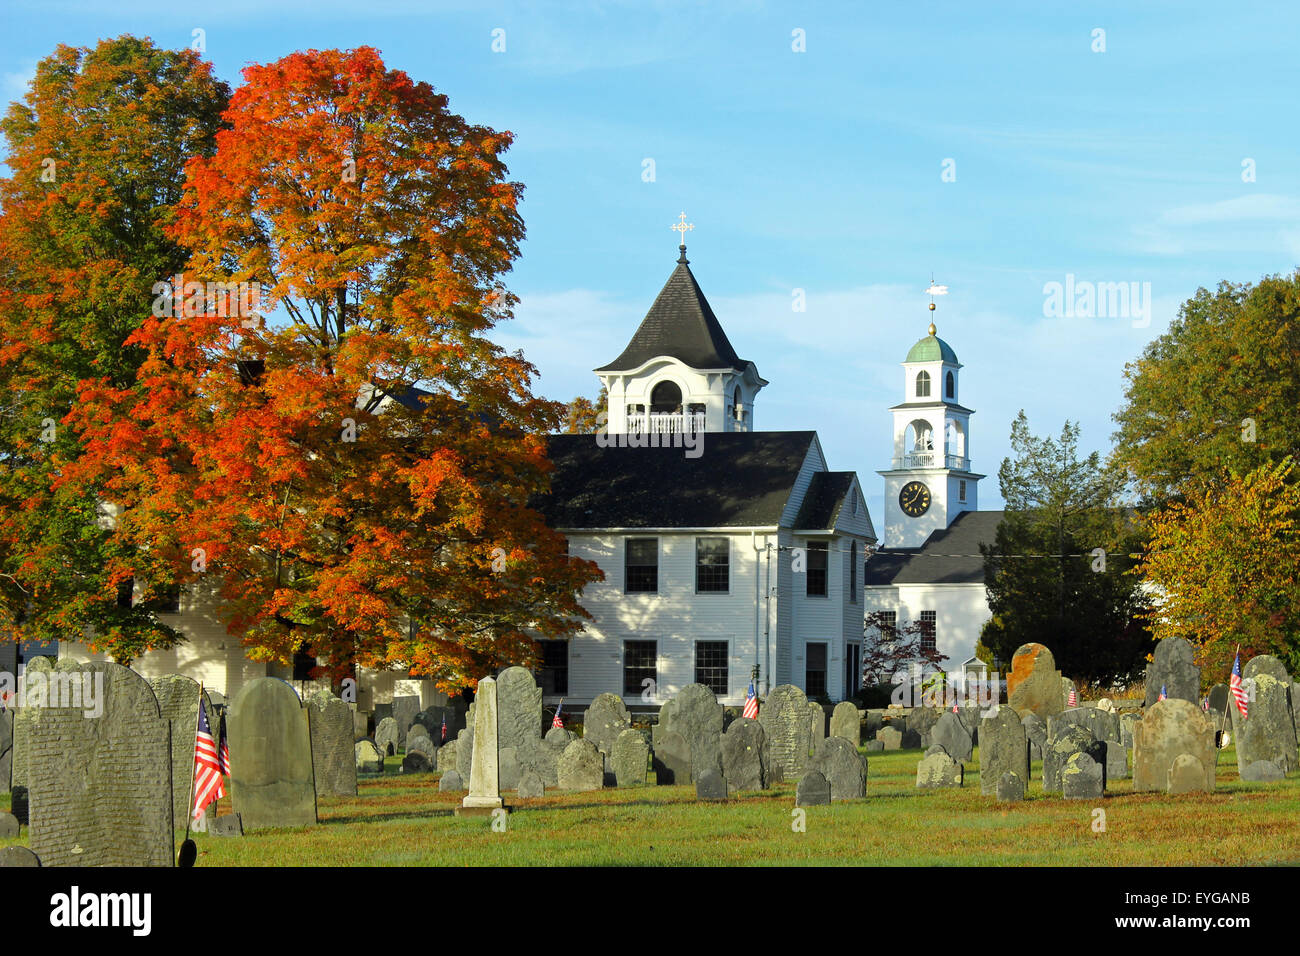 A small New England Town in the Fall. Stock Photo